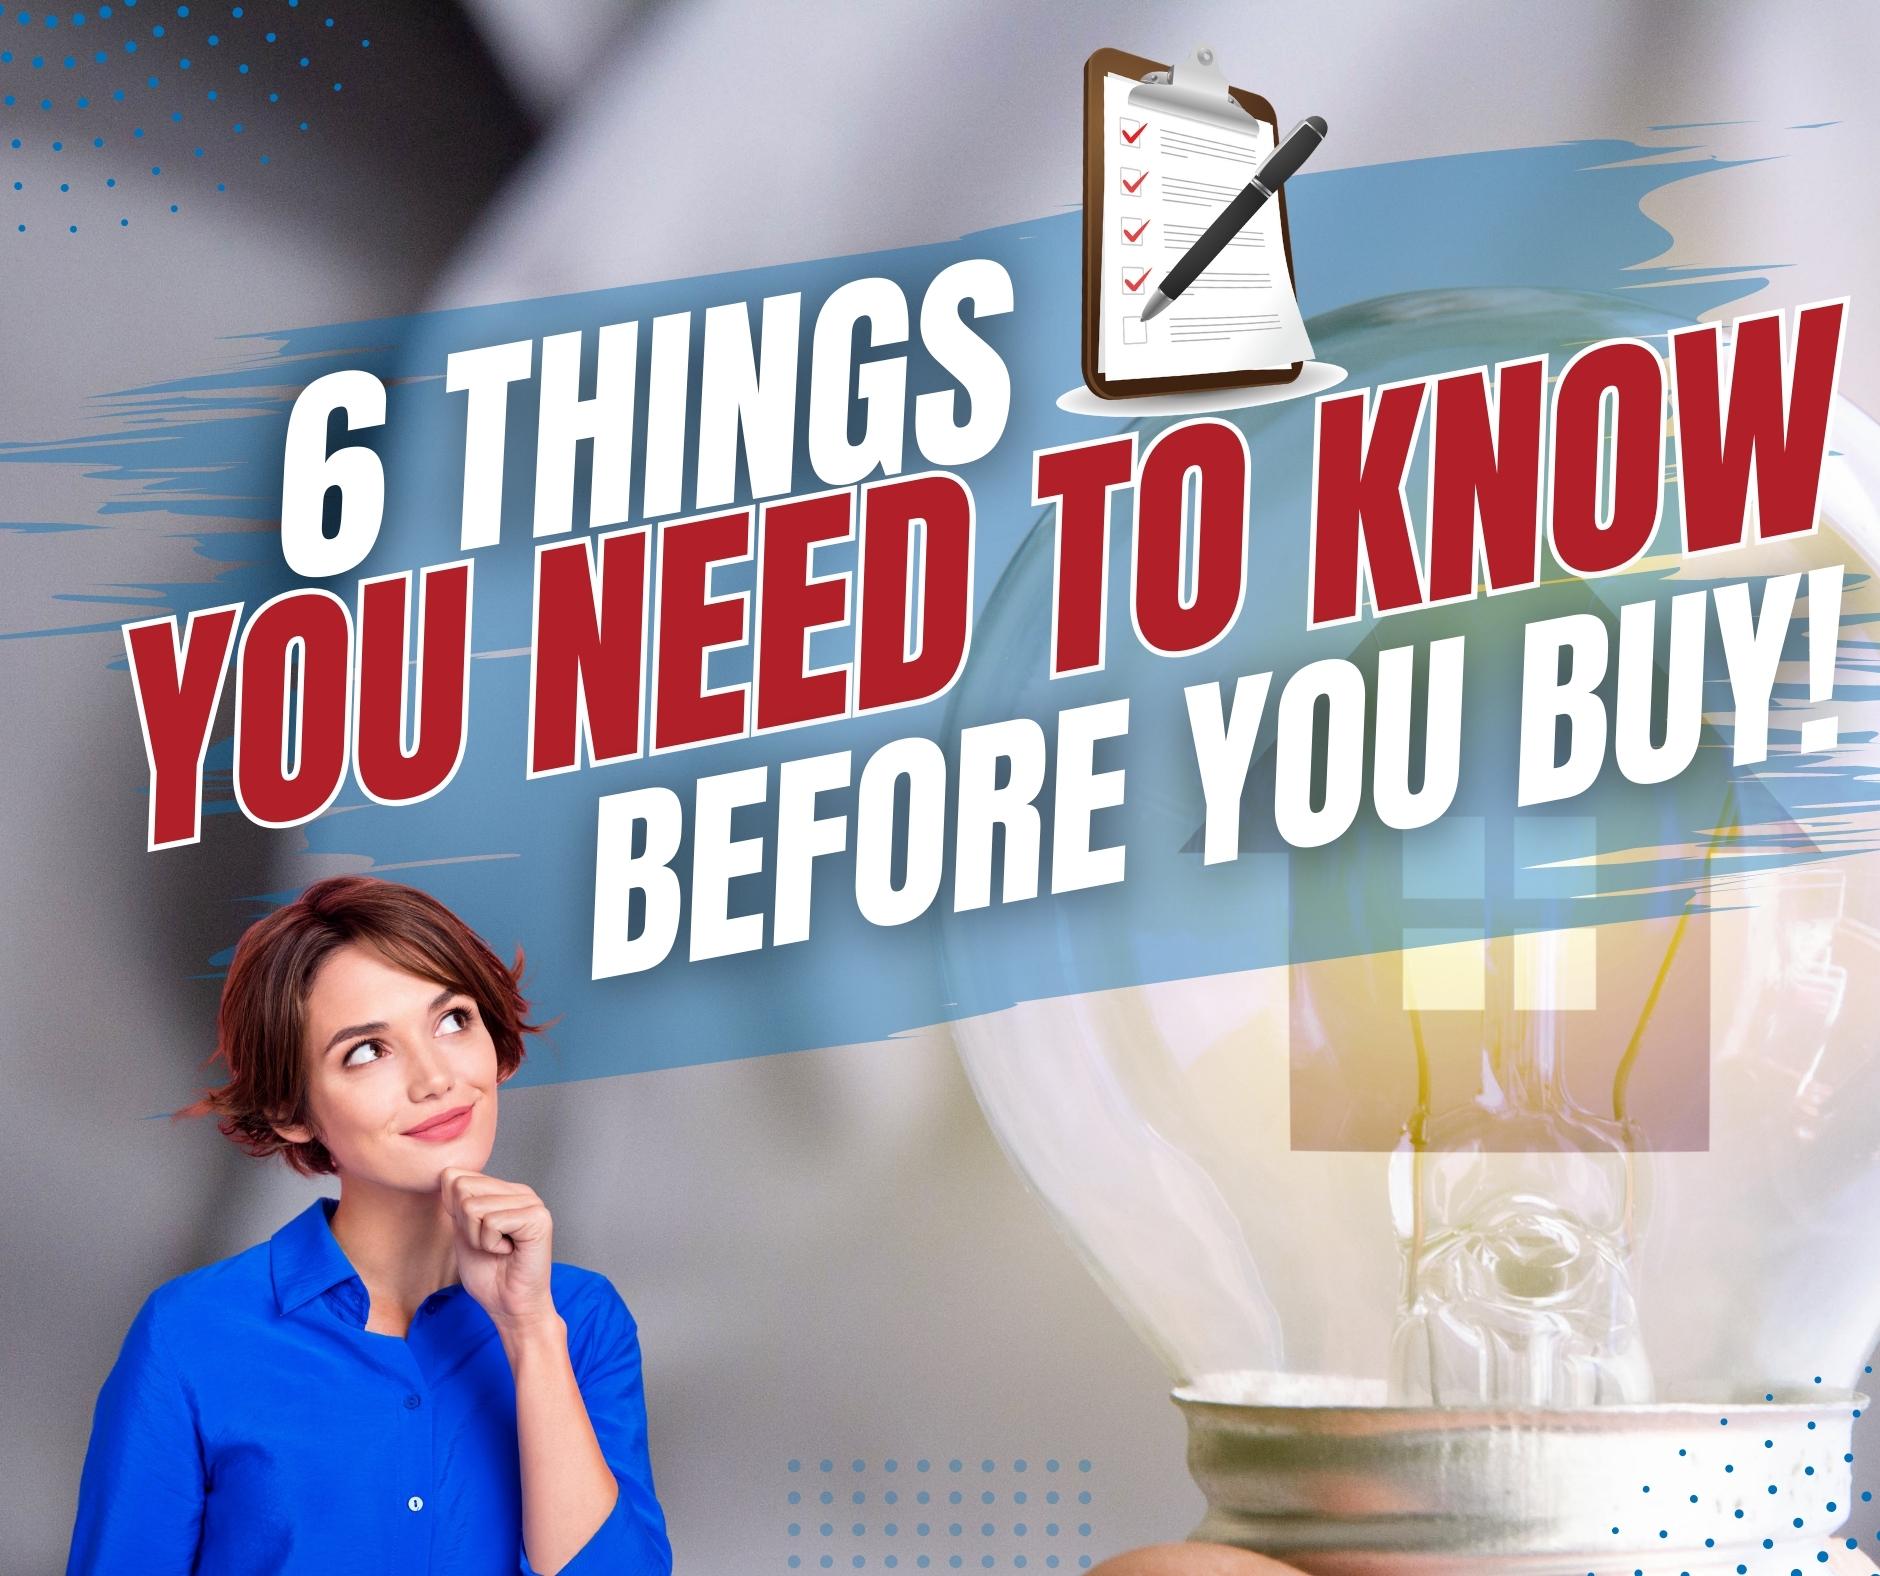 6 Things You Must Know Before You Buy